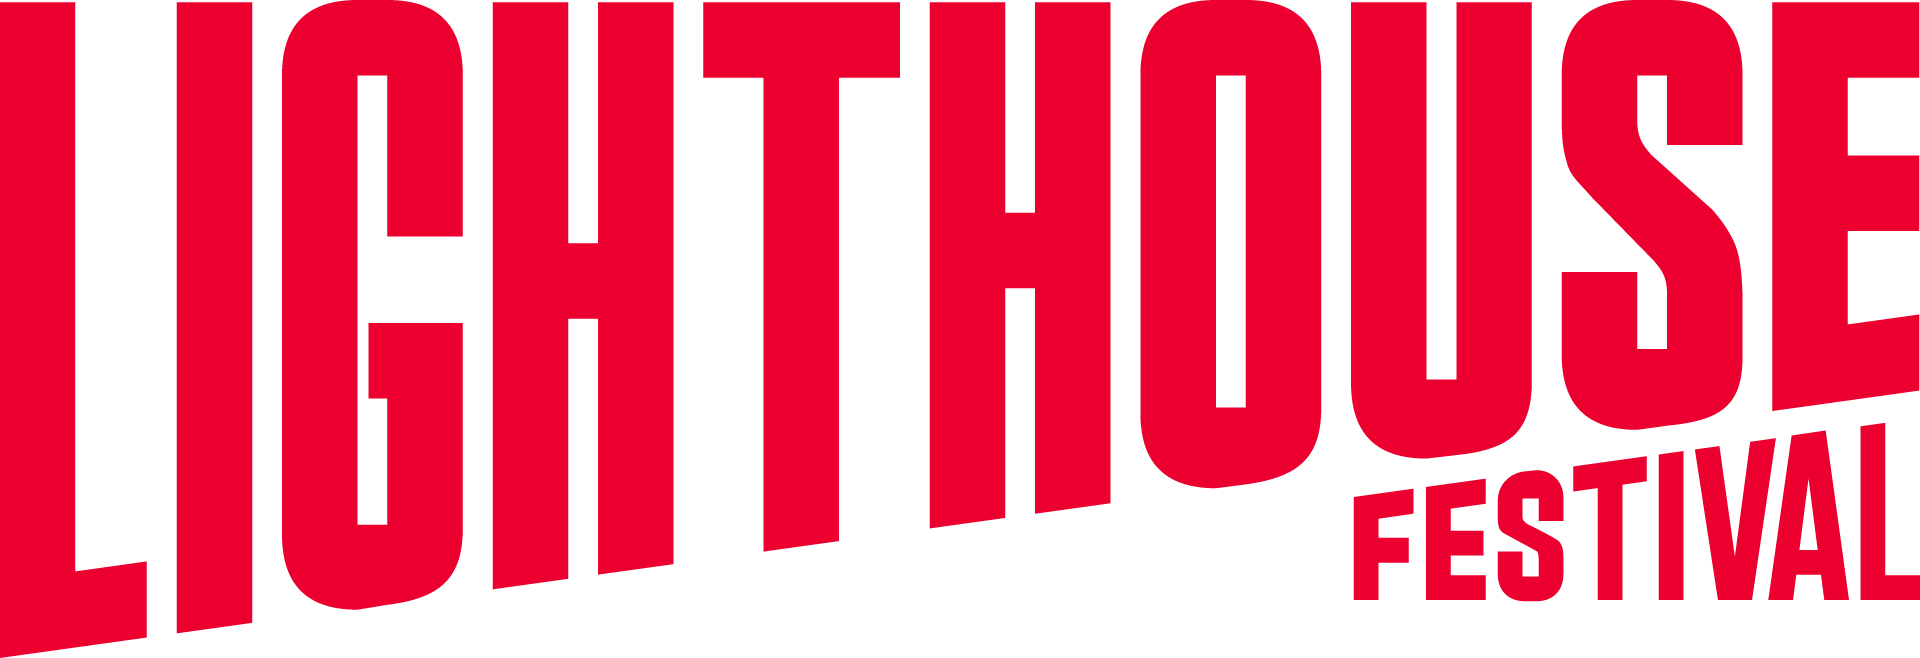 Lighthouse_Logo__RGB_Red.png